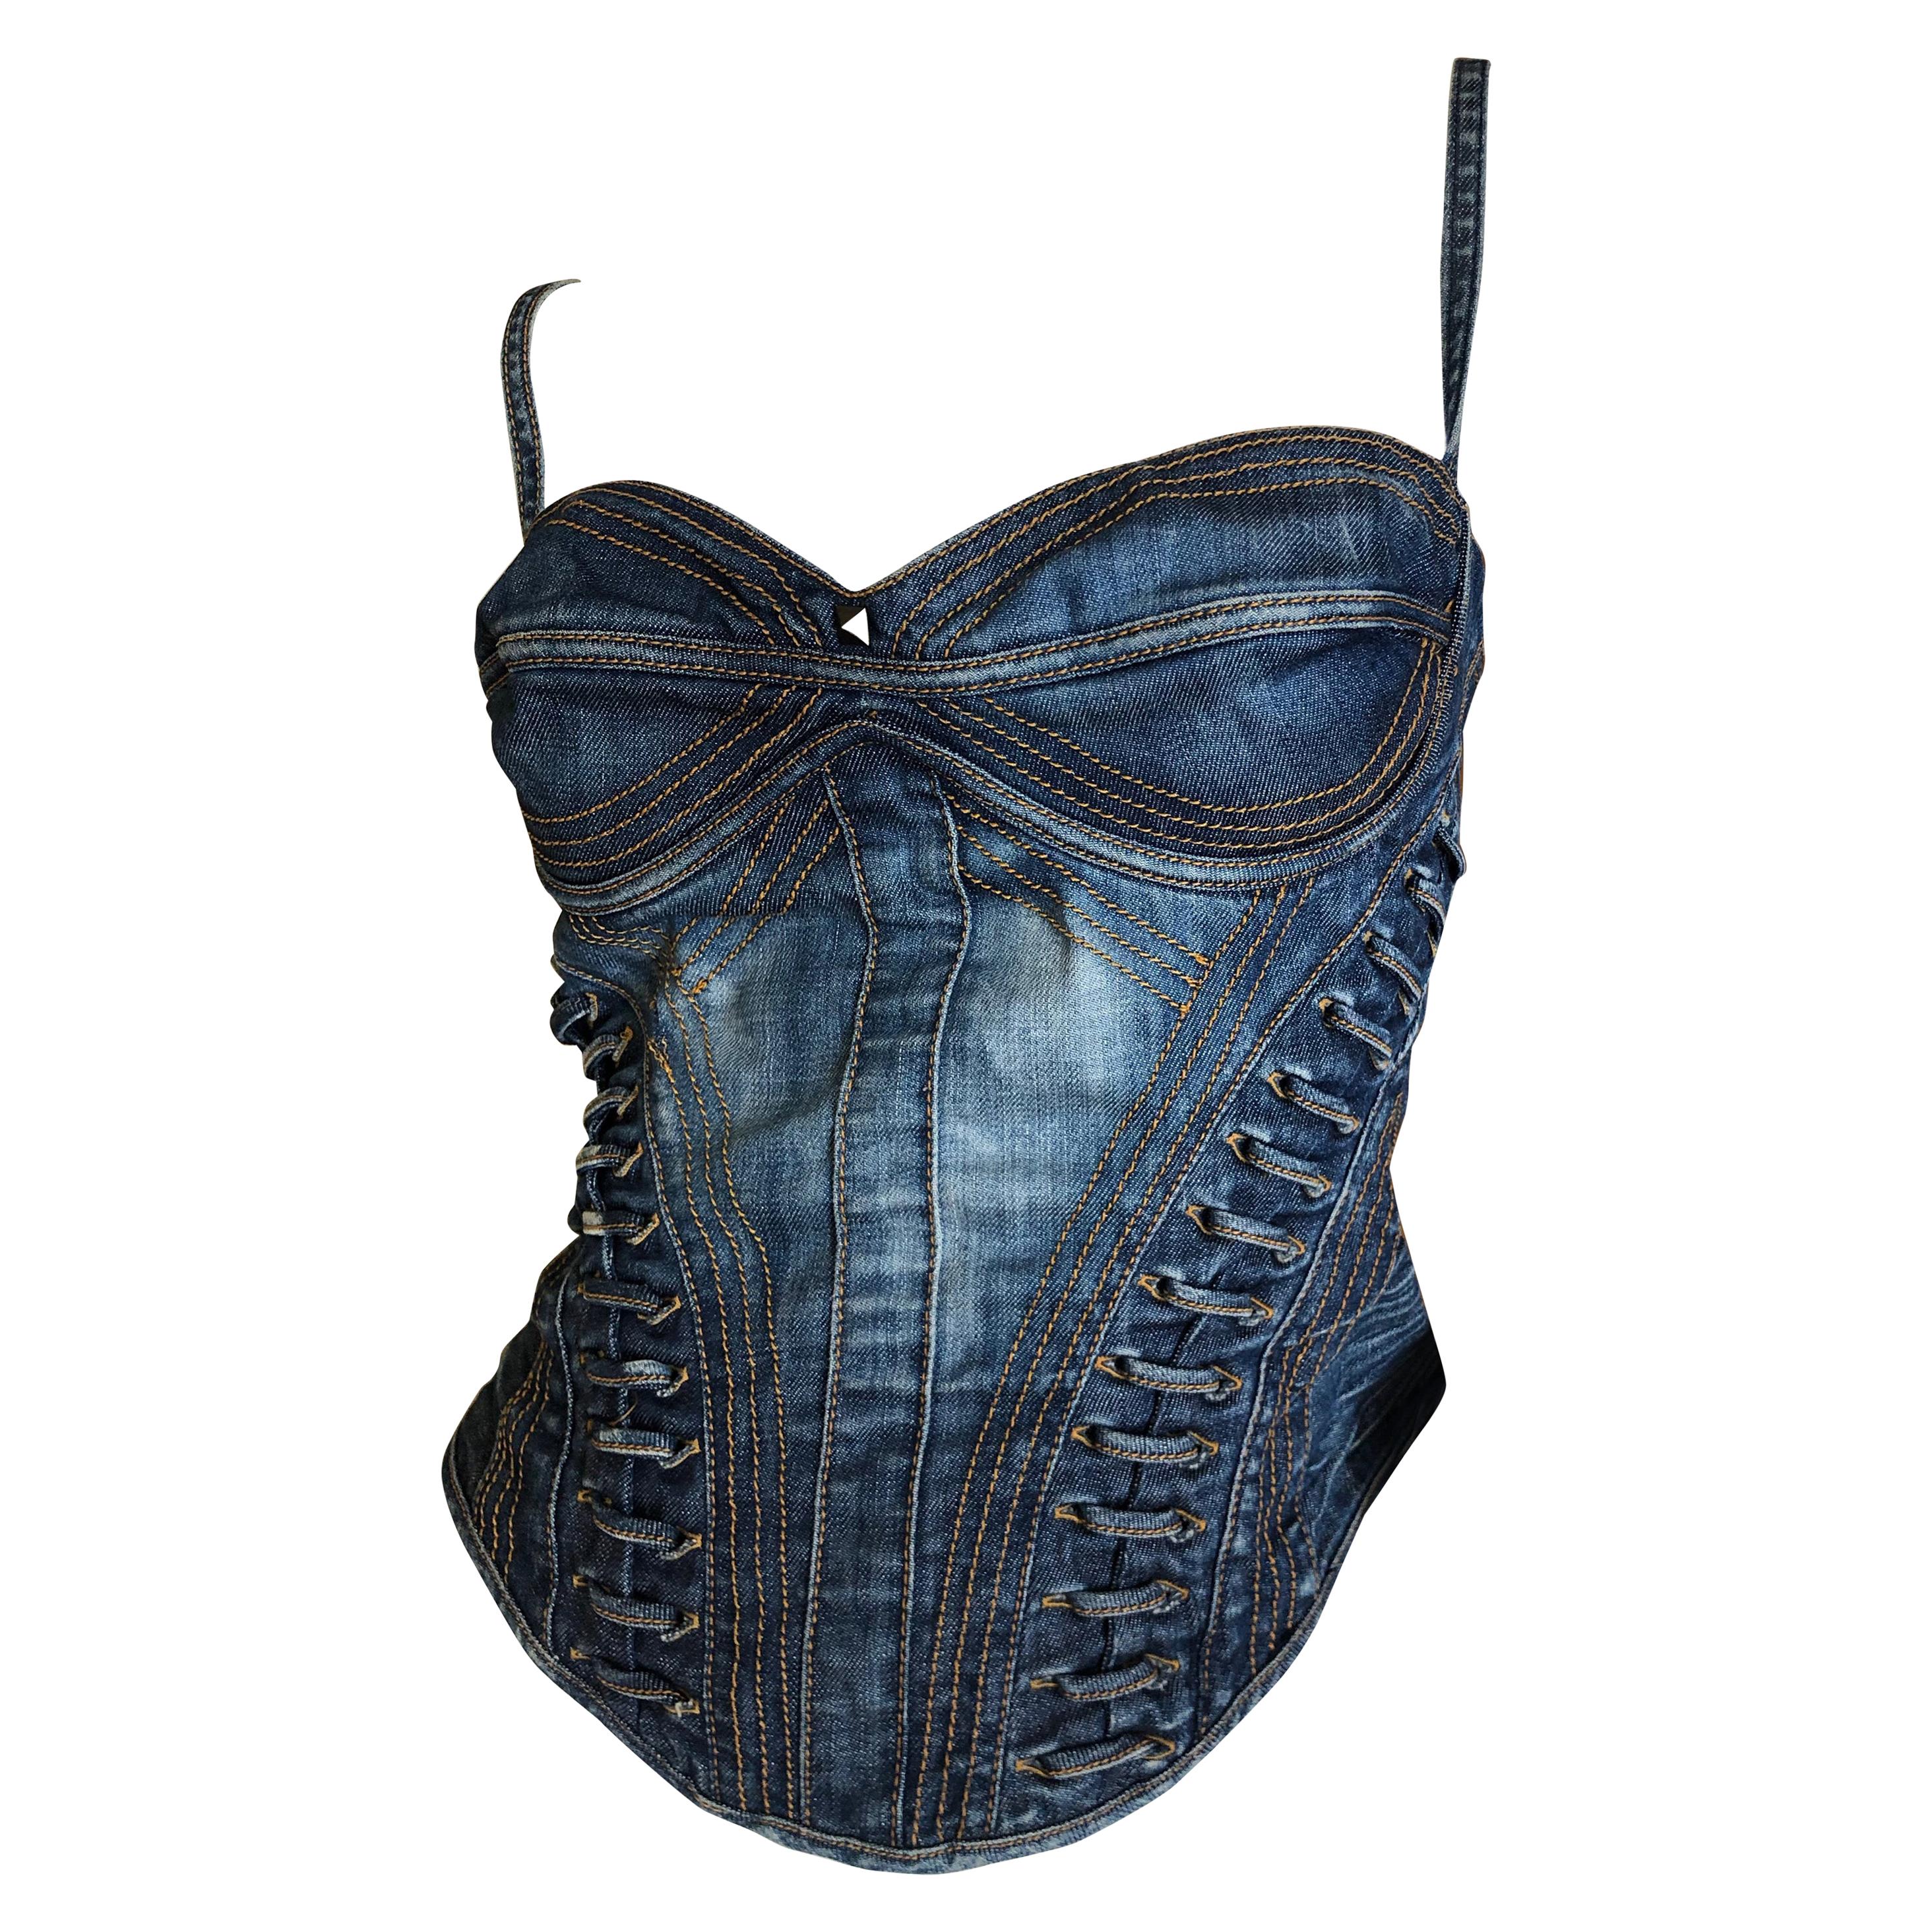 Roberto Cavalli for Just Cavalli Denim Corset with Lace Up Details New Tags